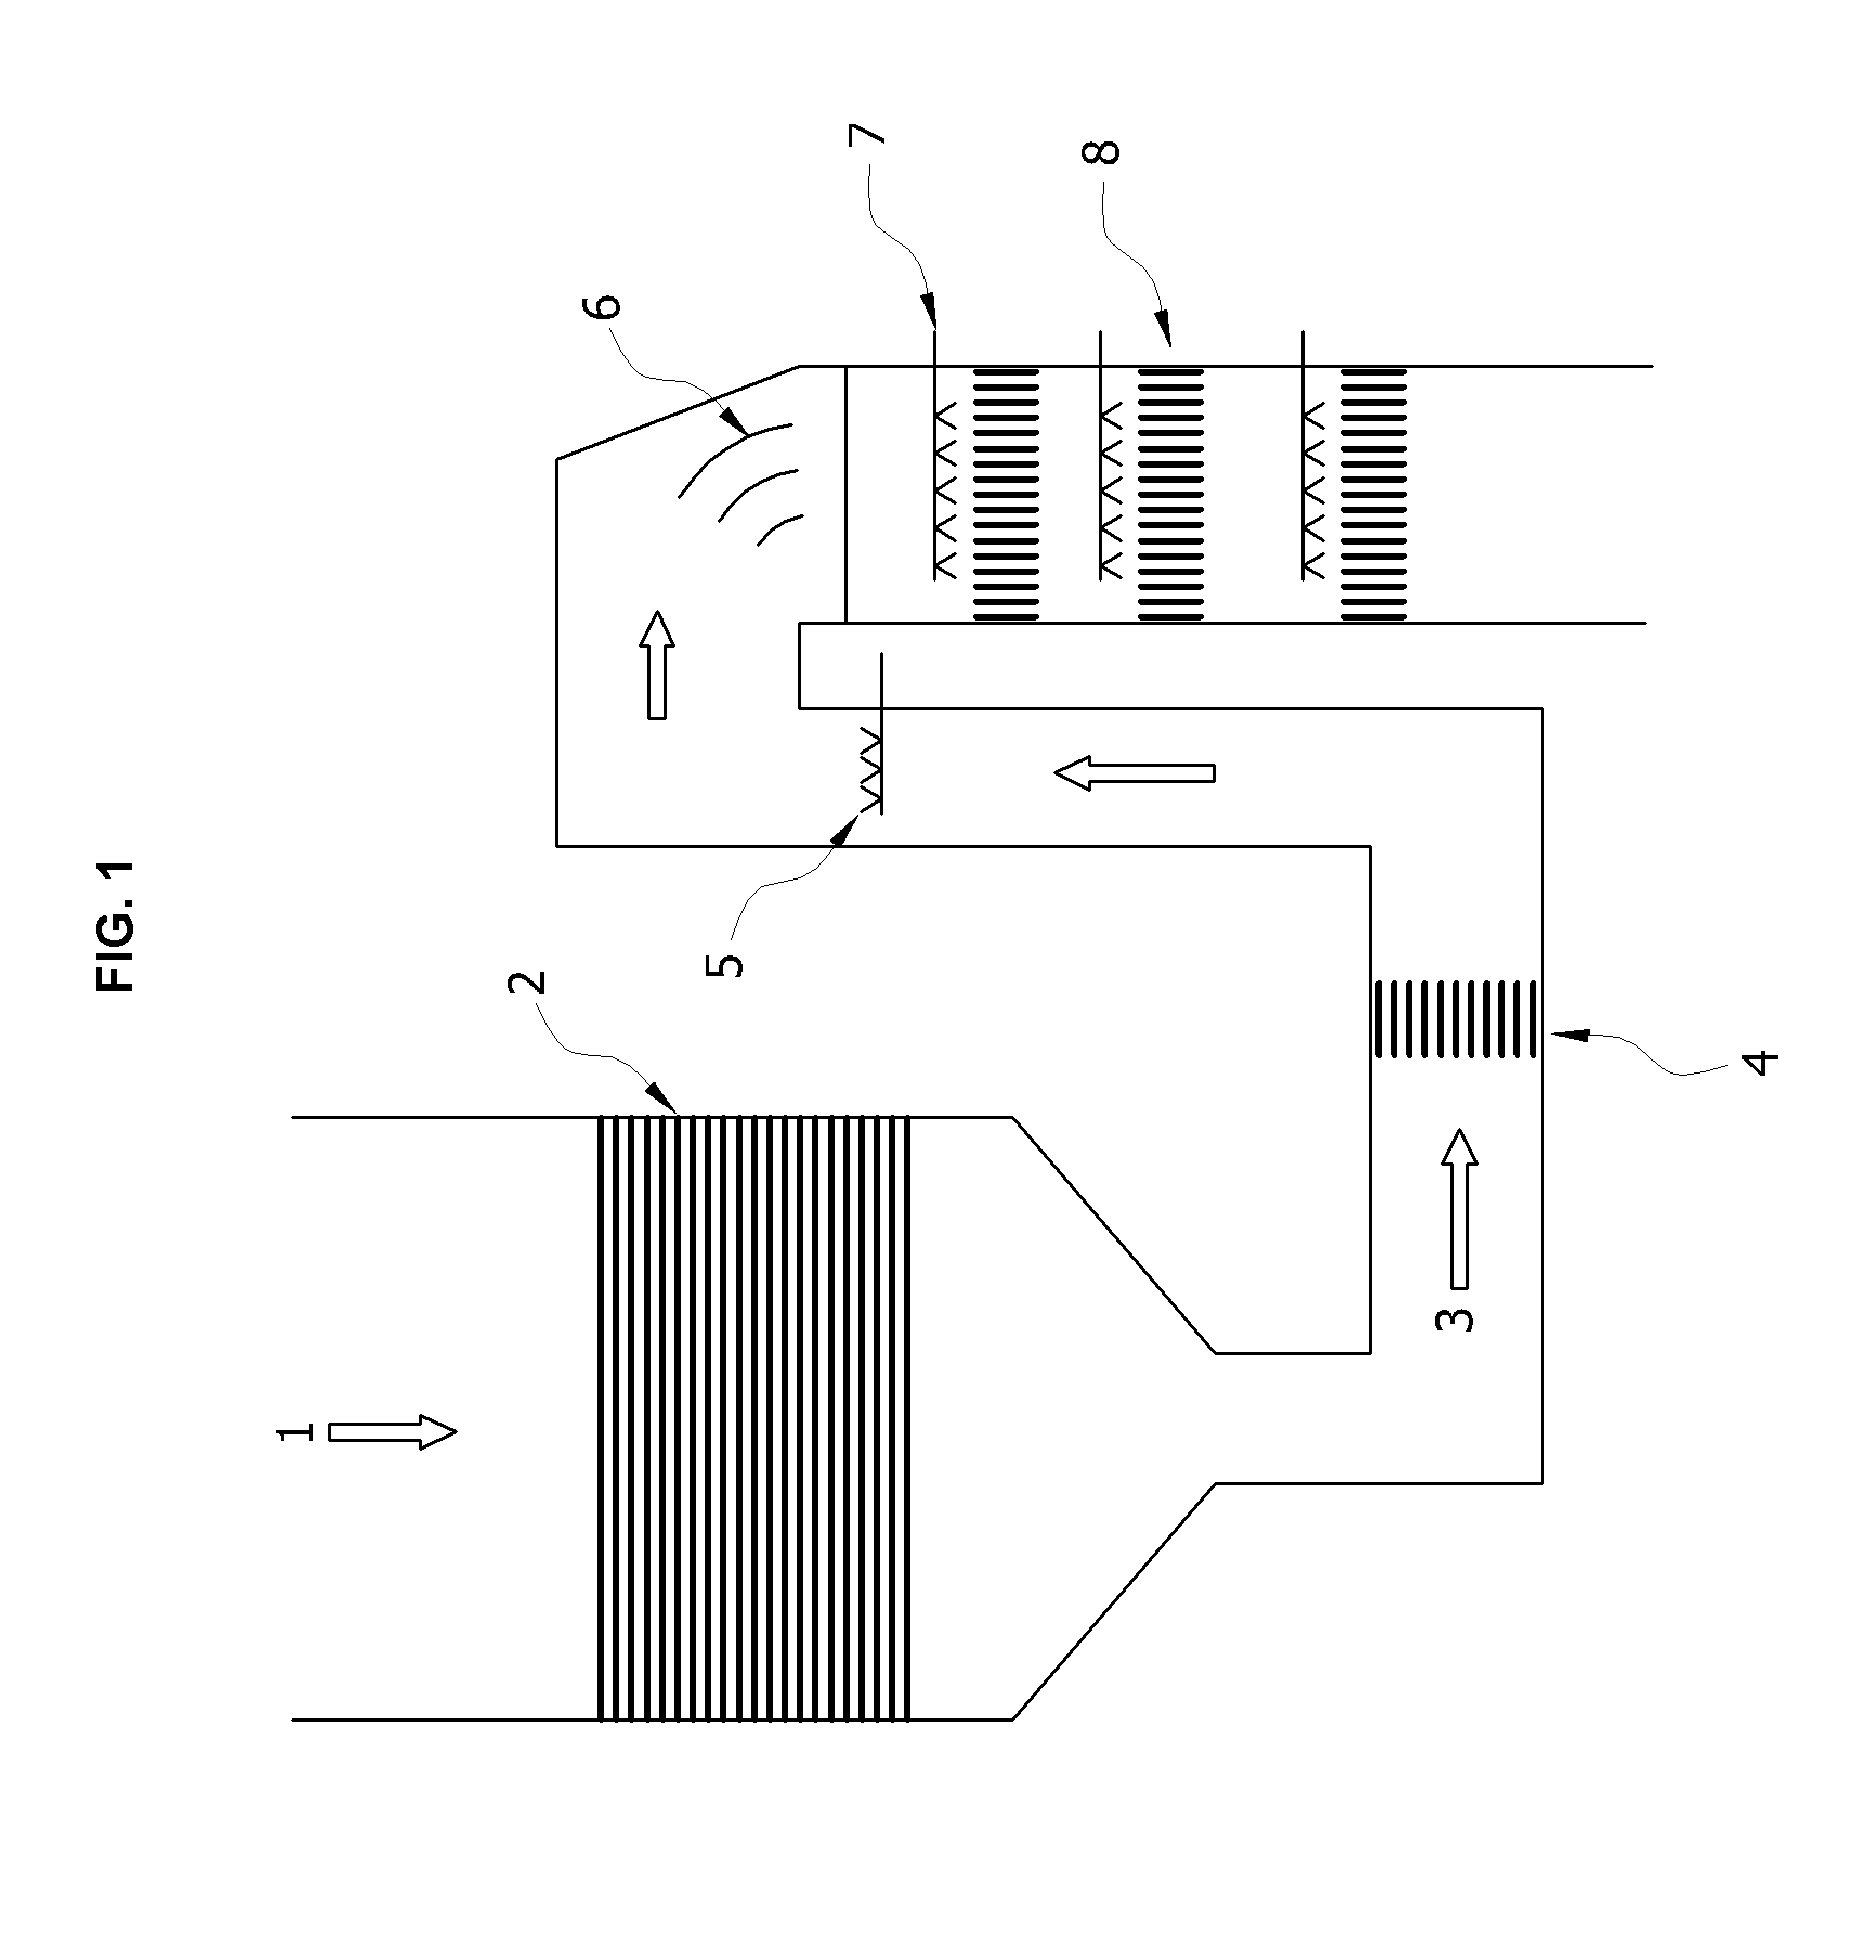 SYSTEM USING SELECTIVE CATALYTIC REDUCTION FOR IMPROVING LOW-TEMPERATURE De-NOx EFFICIENCY AND REDUCING YELLOW PLUME